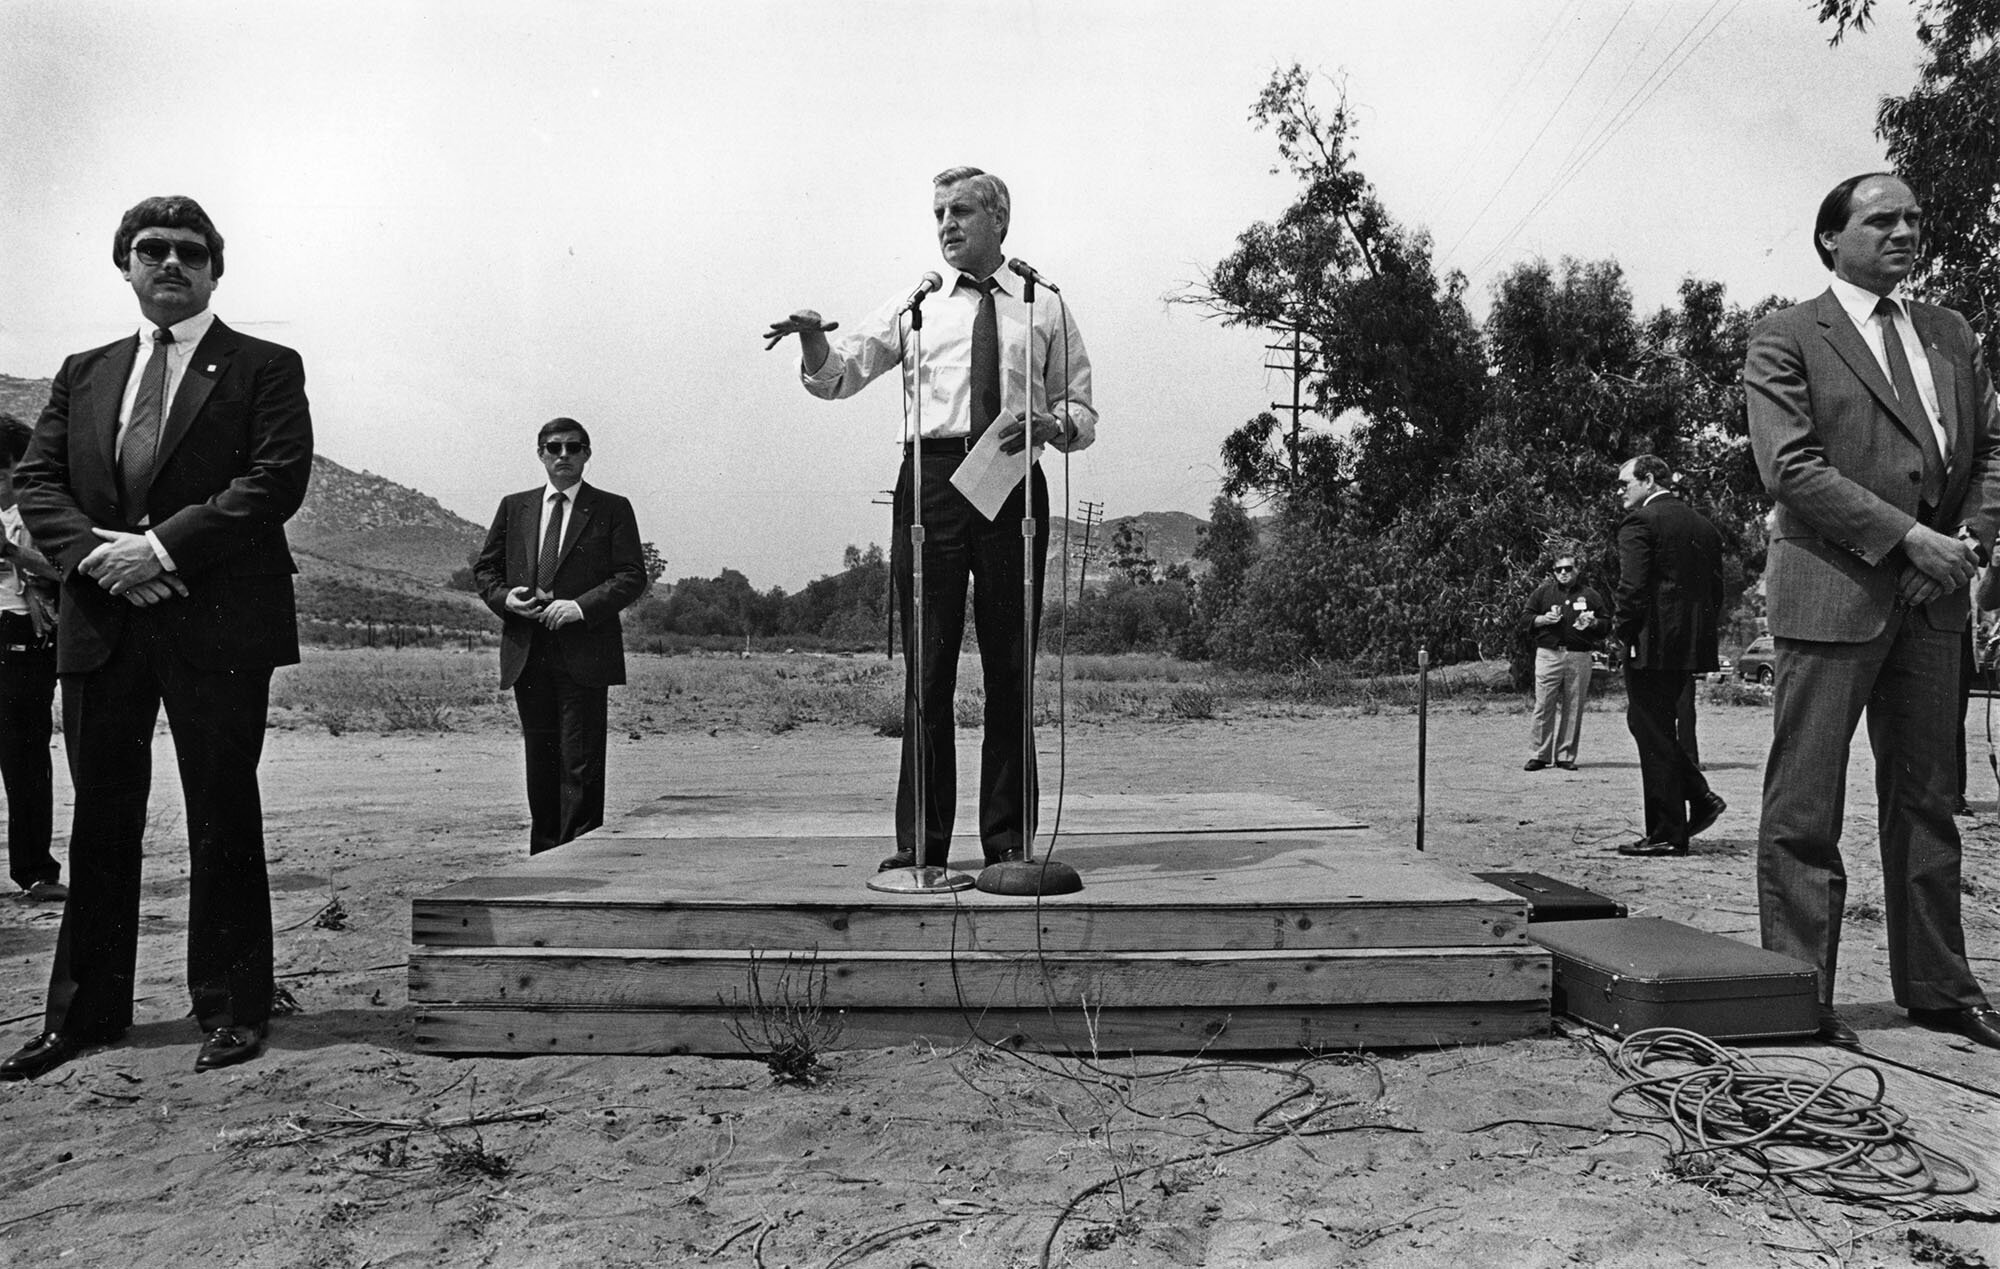  May 15, 1984:Democratic presidential candidate Walter F. Mondale as he speaks at the Springfellow acid pits in Riverside County, with Secret Service men close by. this photo was published in the May 16, 1984 Los Angeles Times. Photo: Marsha Traeger-